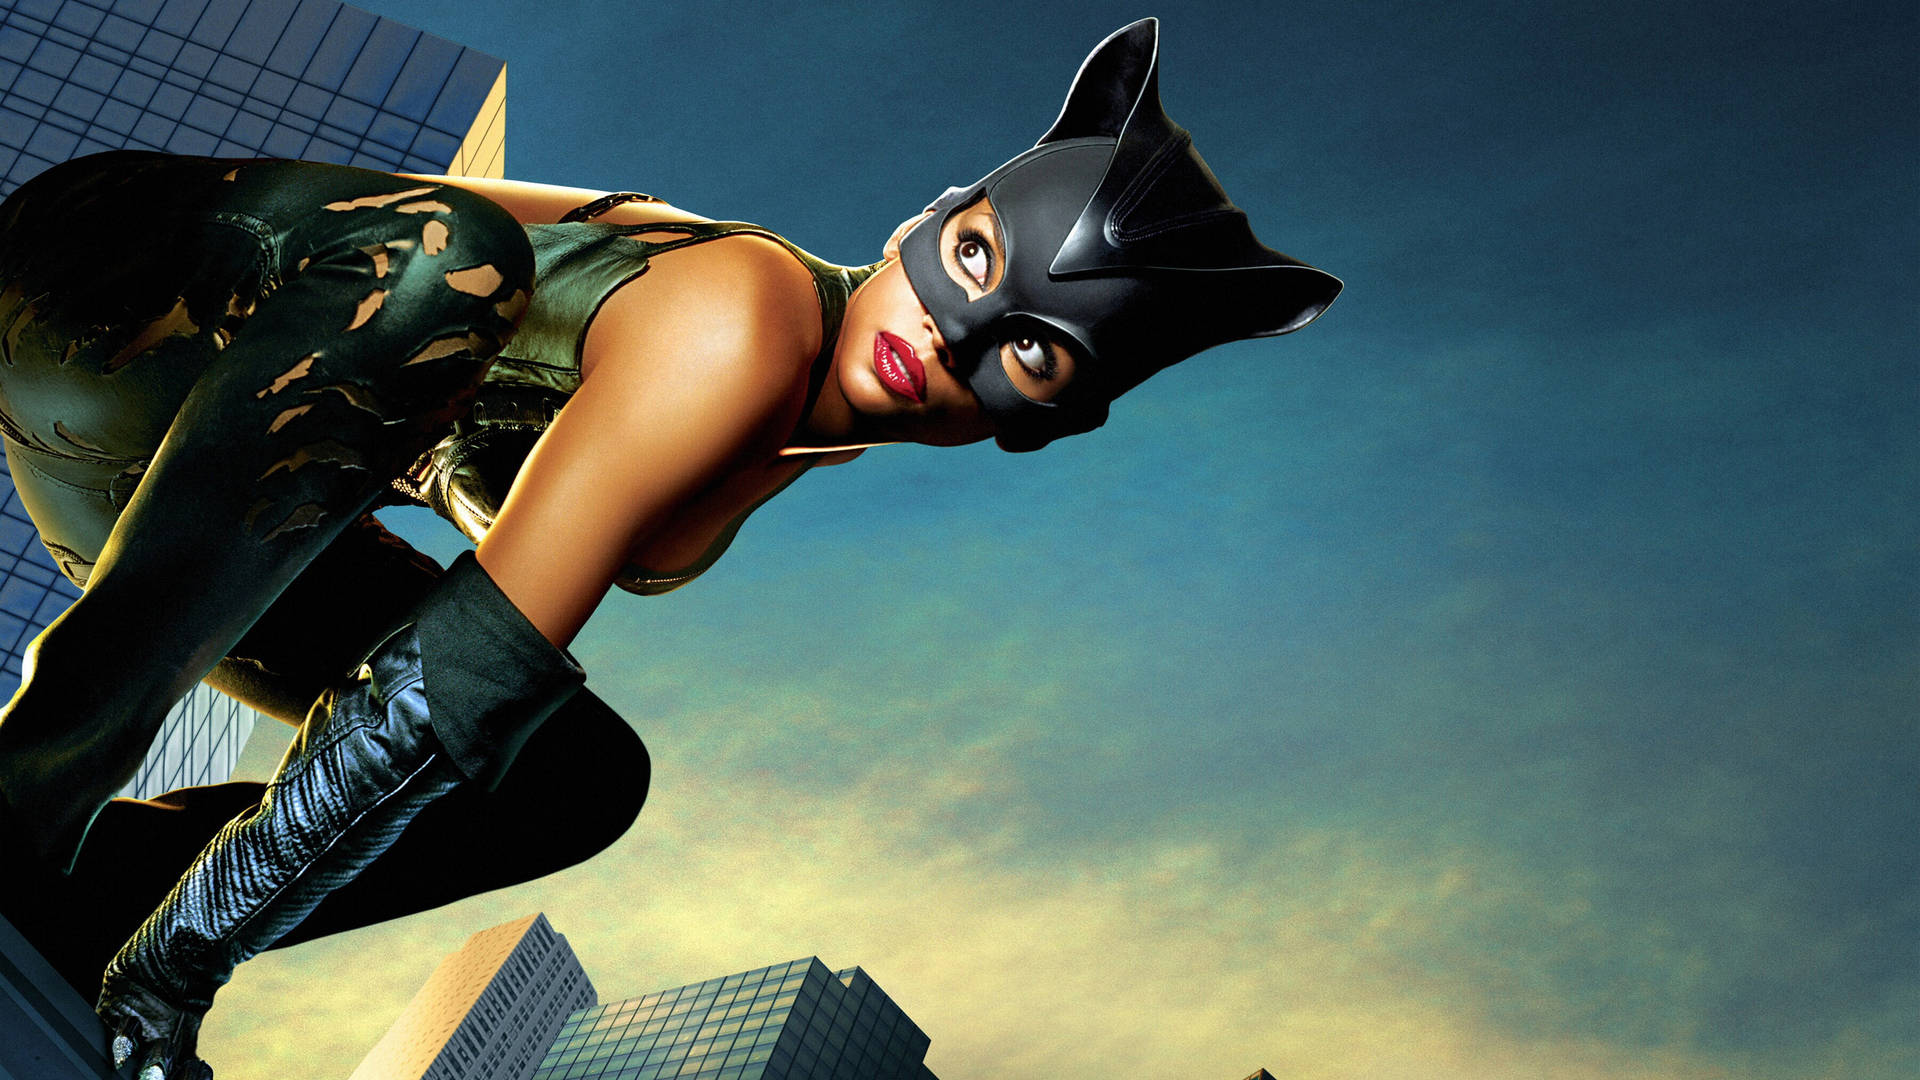 Halle Berry As Catwoman Background